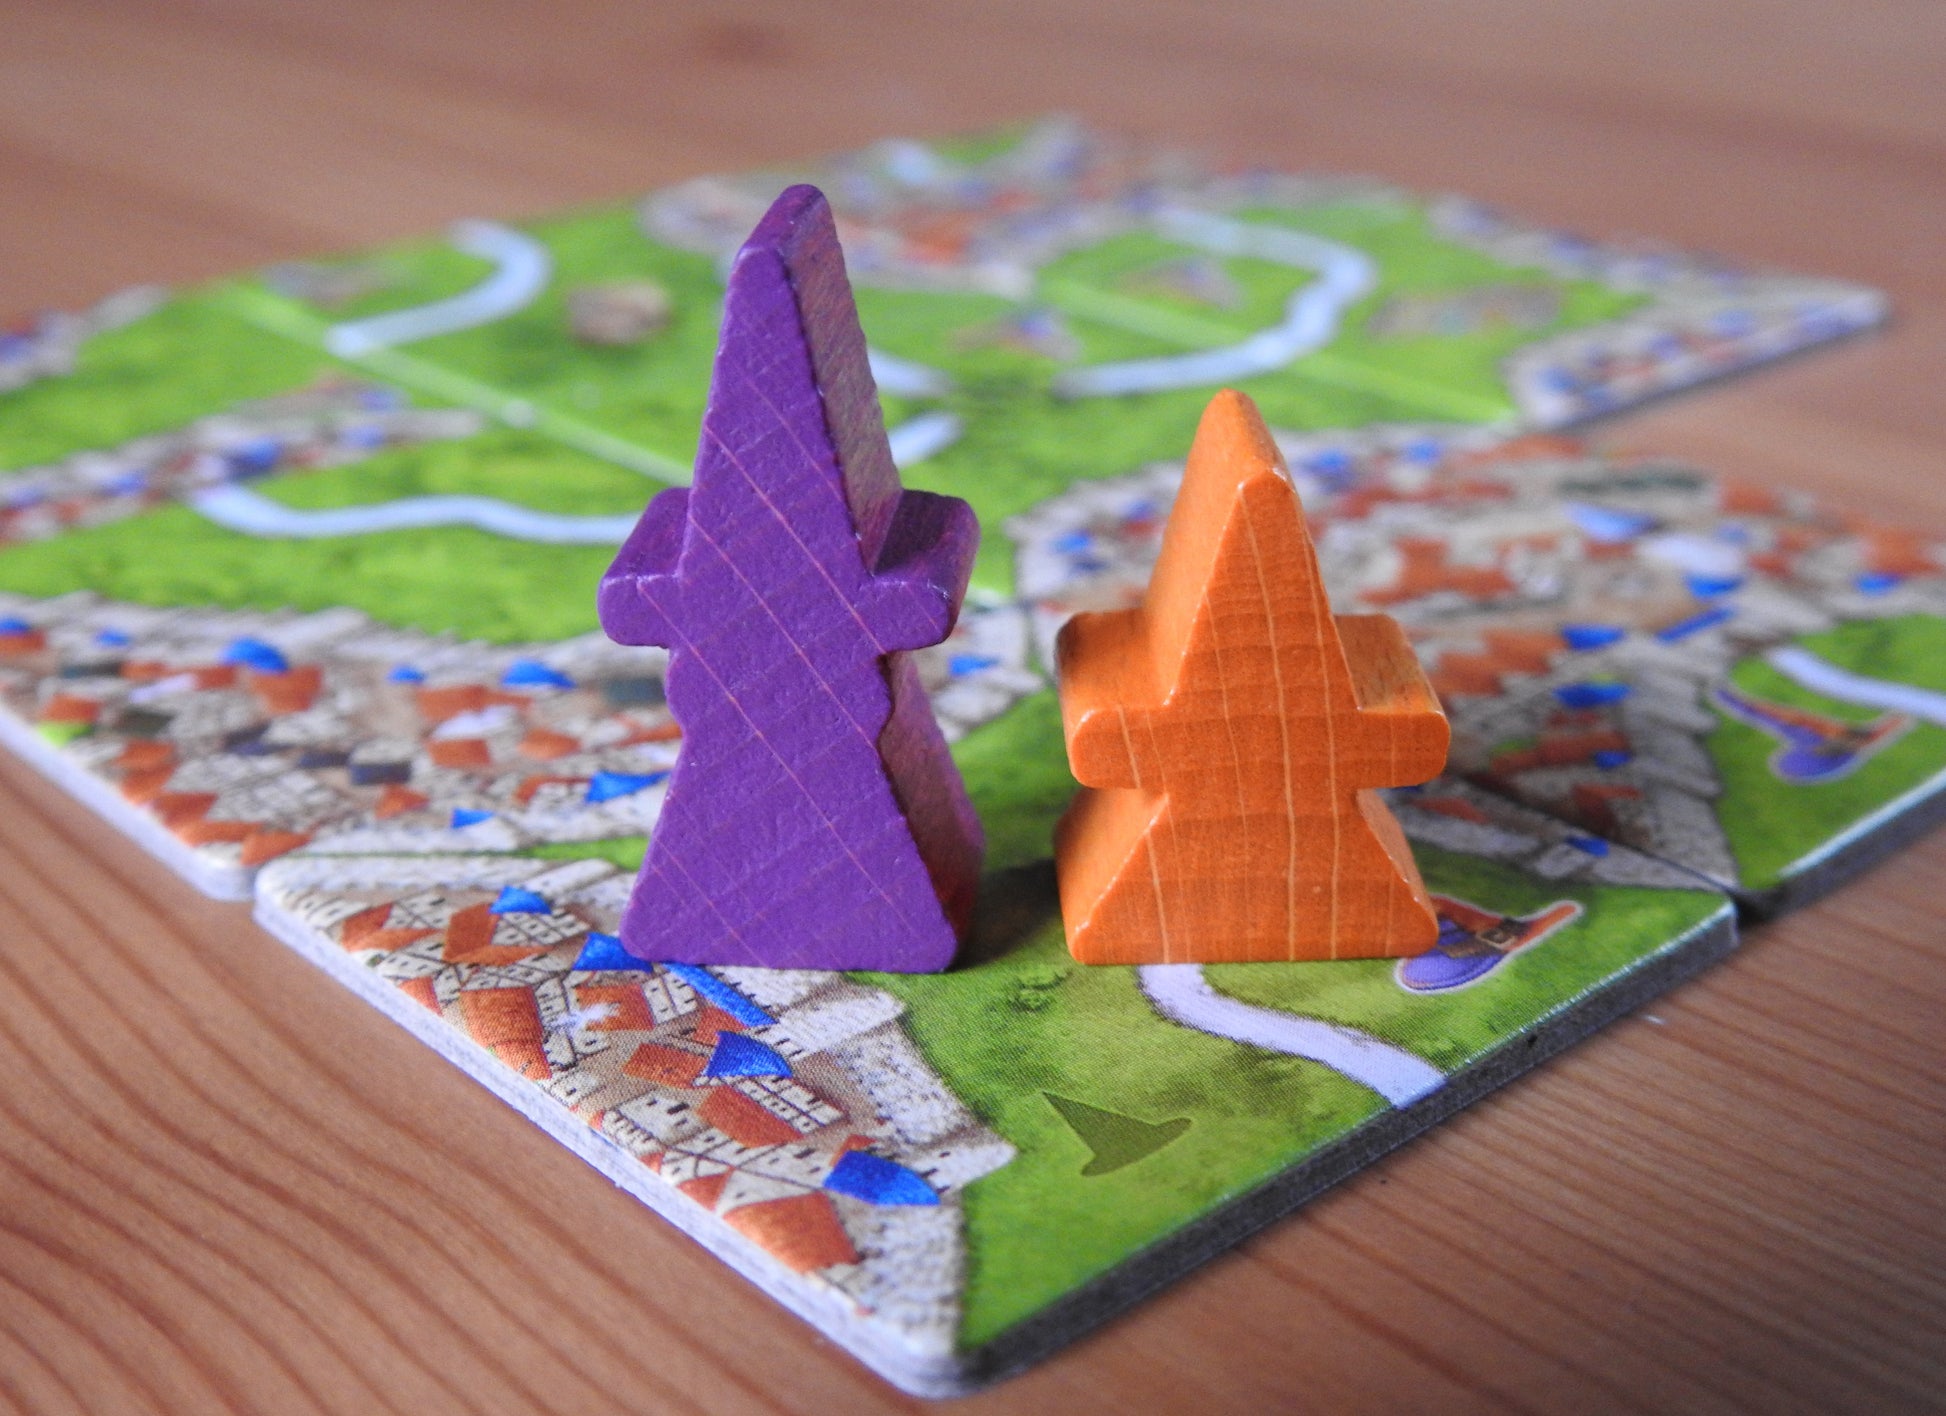 Close-up of the purple wooden witch meeple and the orange mage figure that are included in this Carcassonne Mage & Witch expansion.